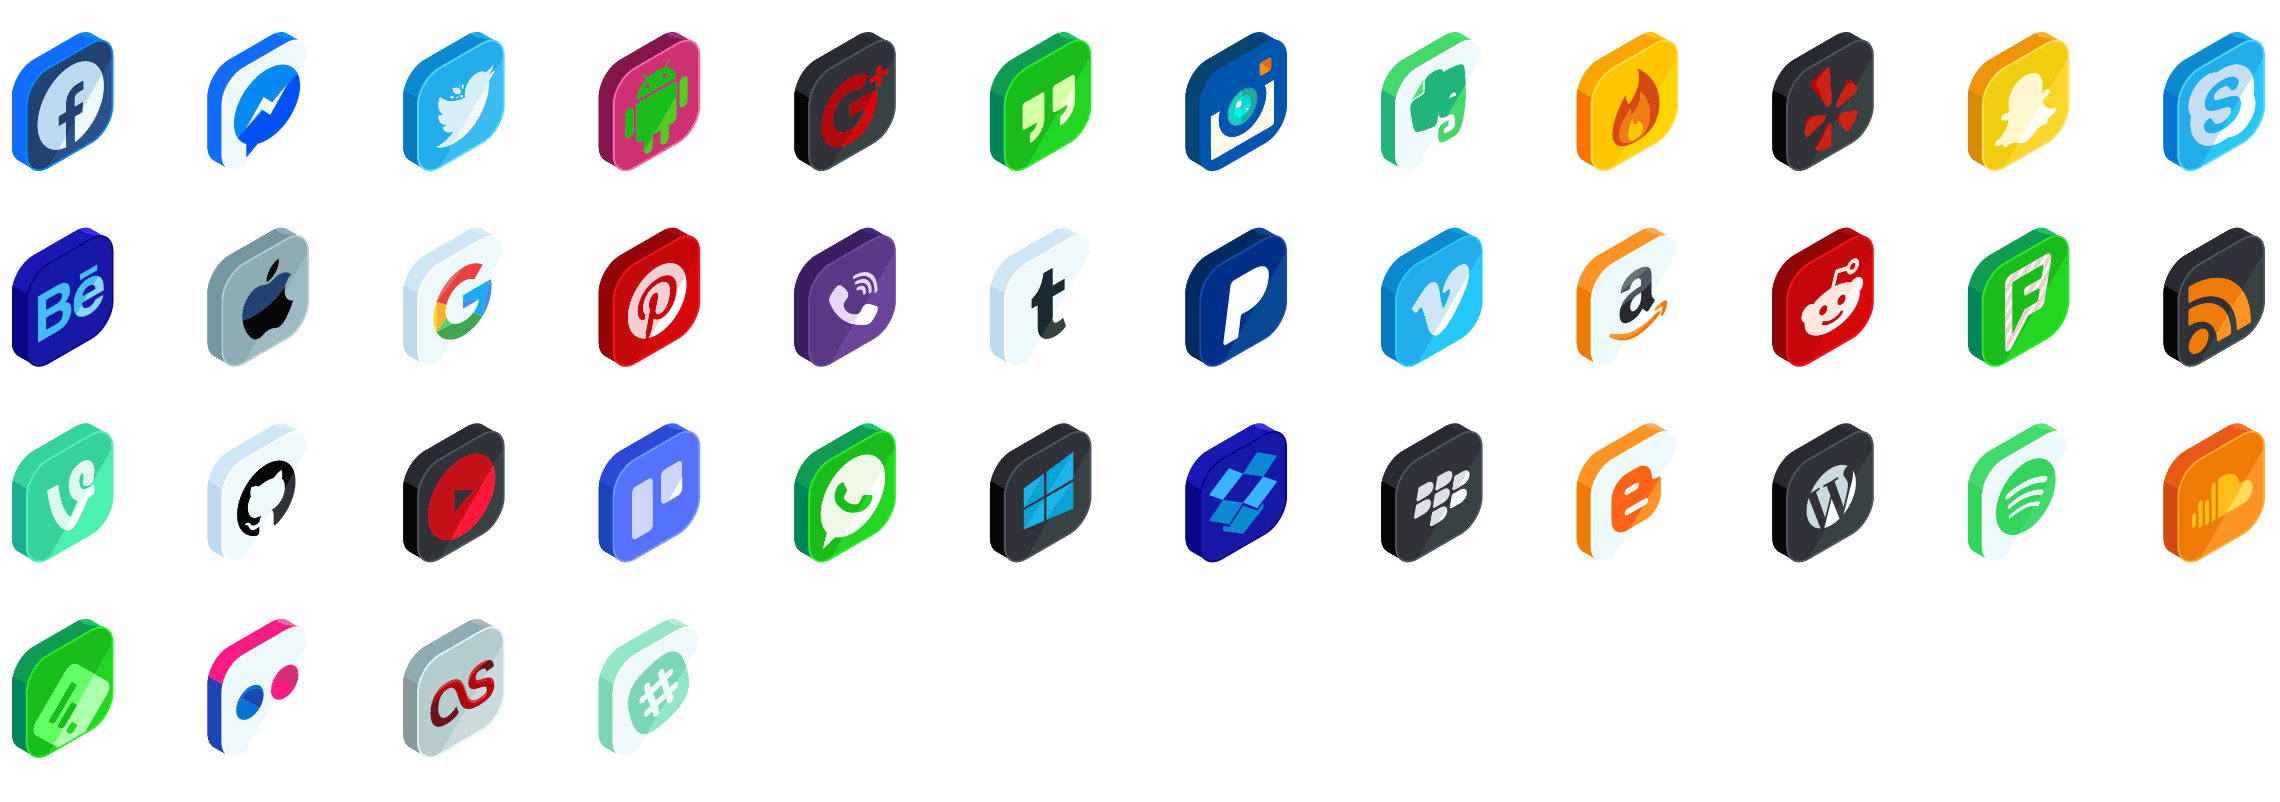 social-media-isometric-icons-preview